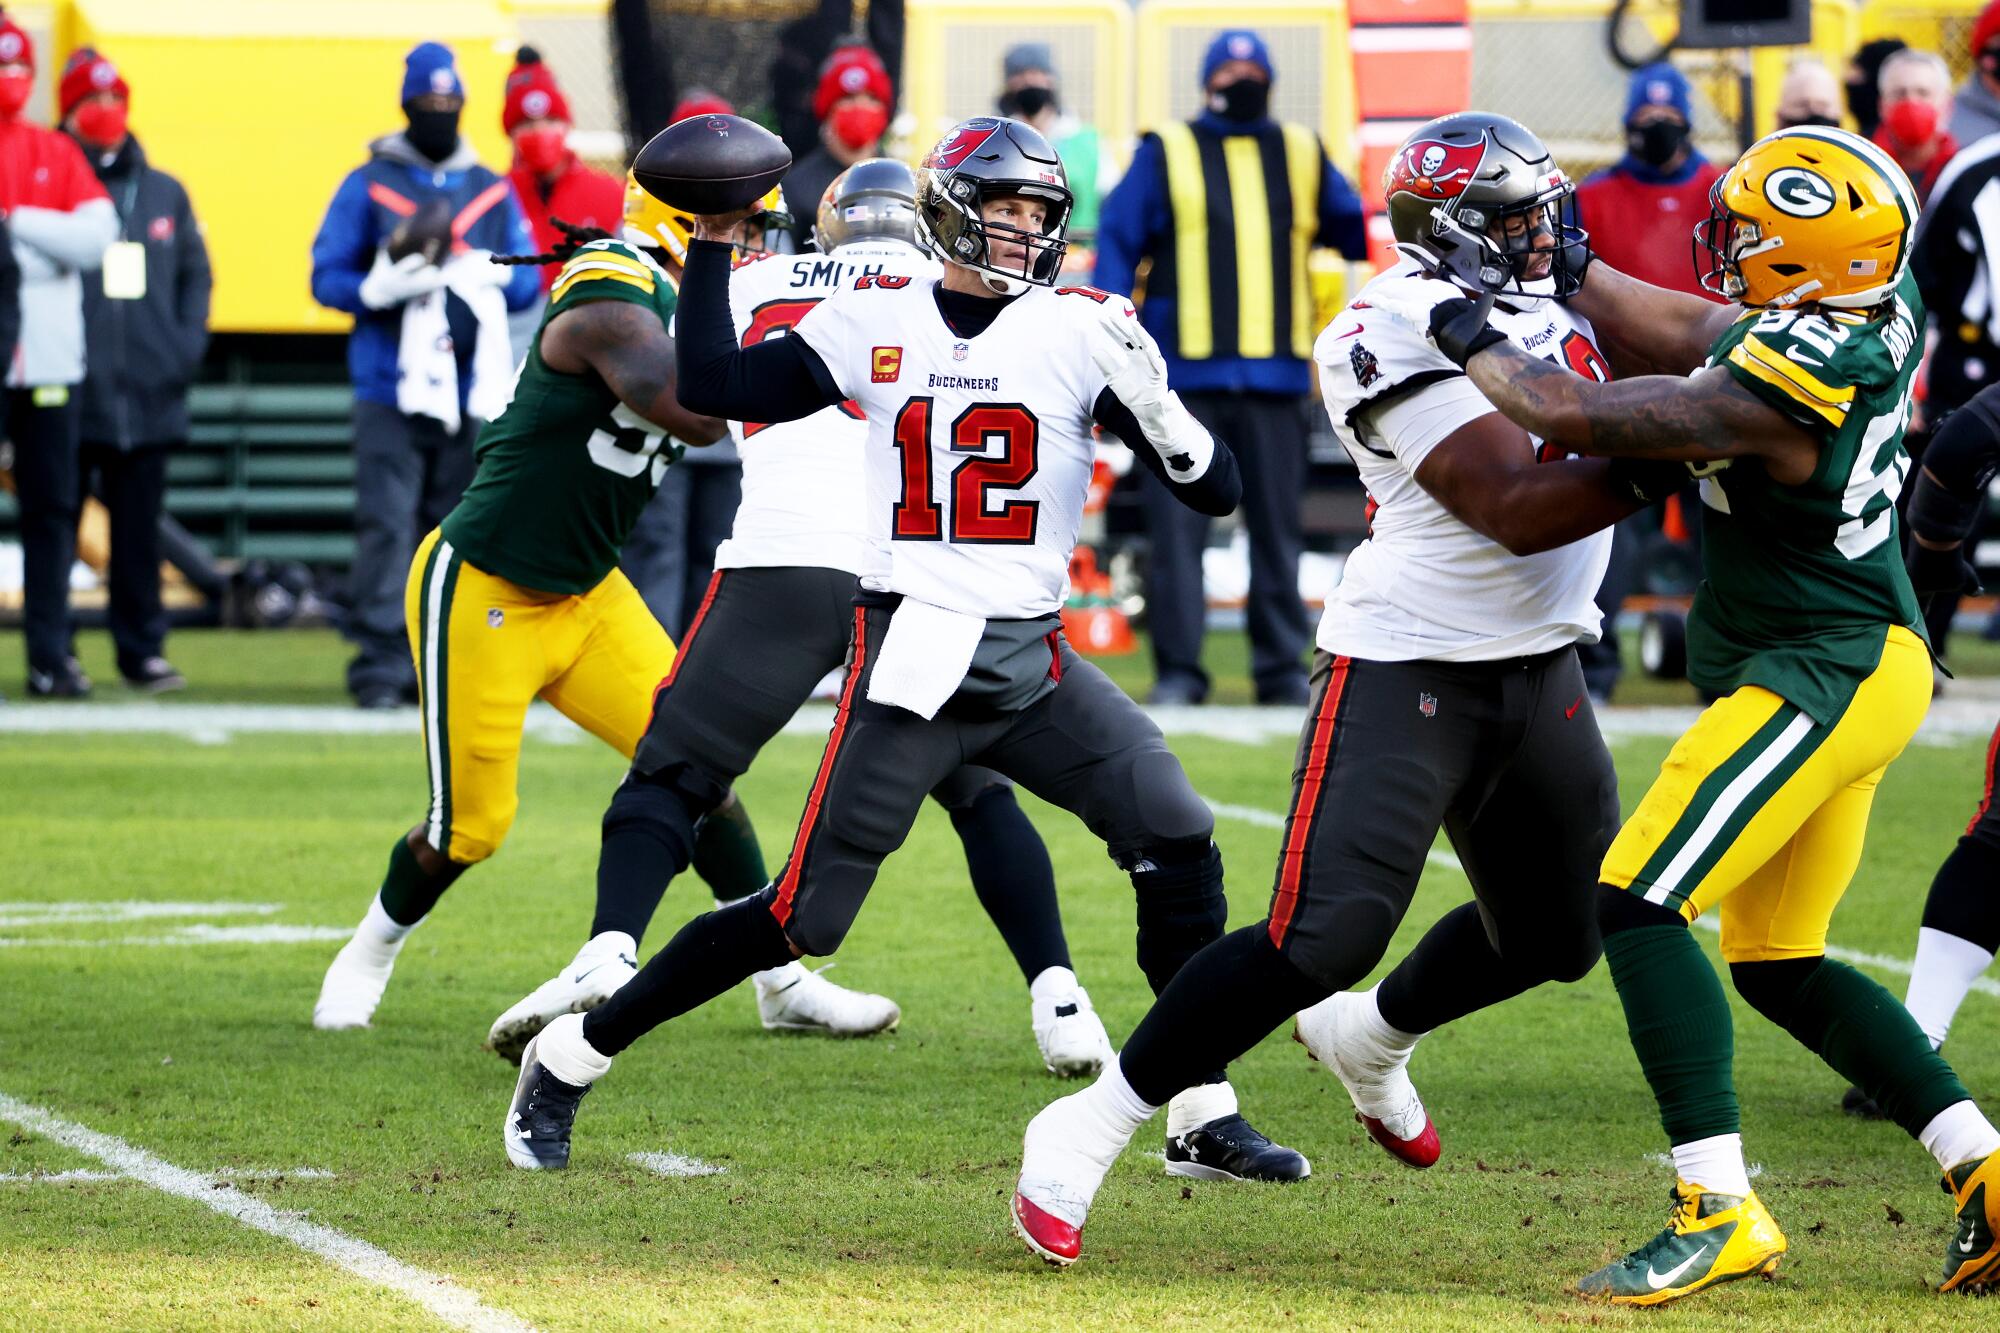 Quarterback Tom Brady  of the Tampa Bay Buccaneers looks to pass in the second quarter